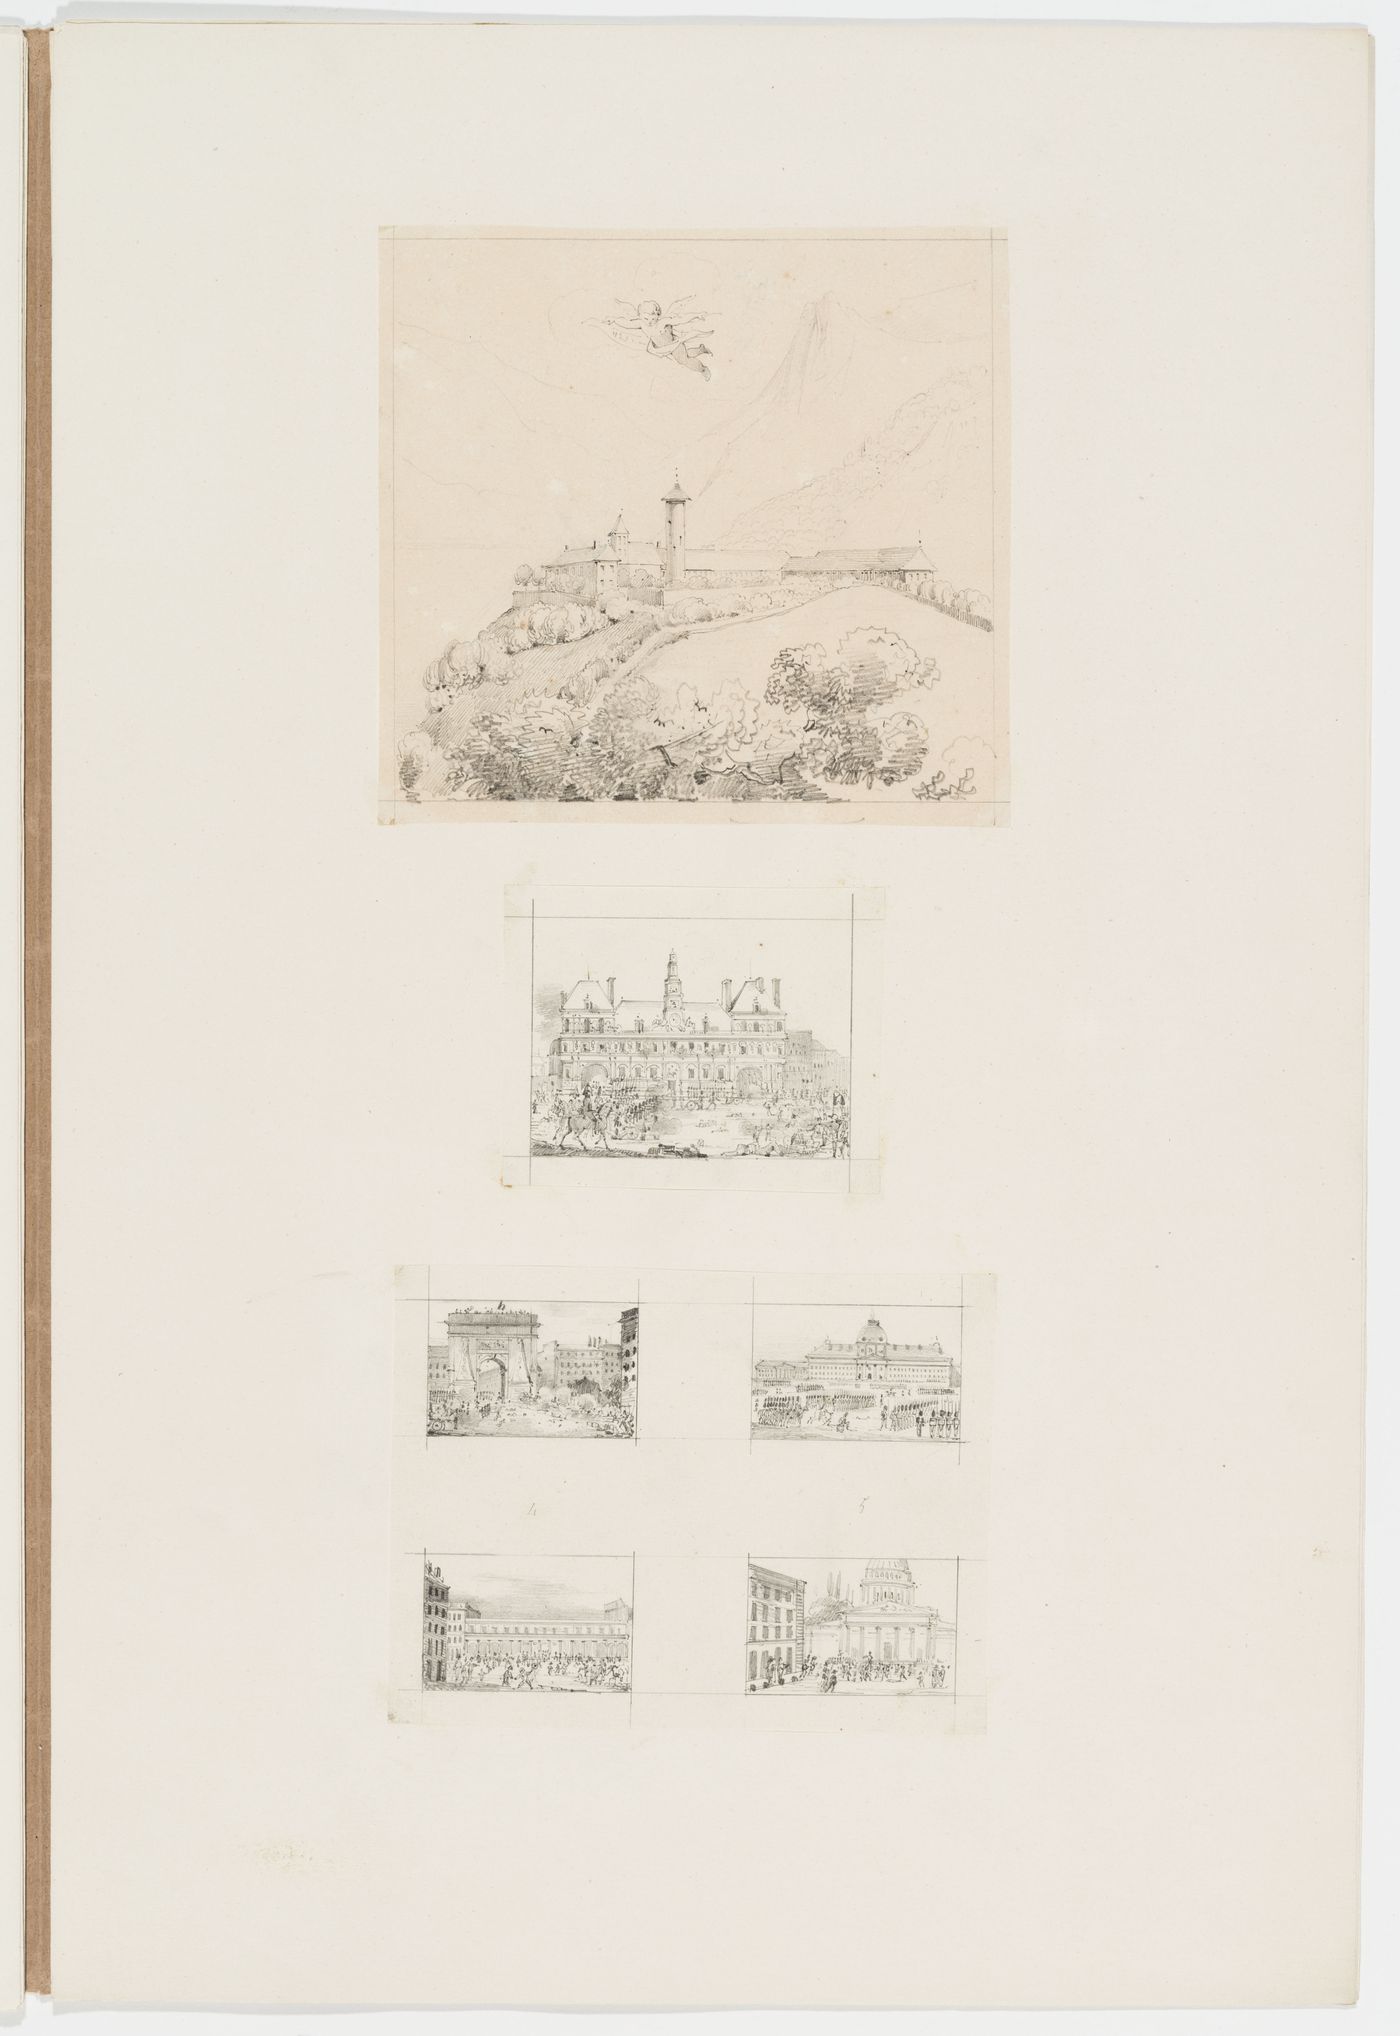 View of a building on a hill, perhaps a farm; Views of structures in Paris, including the Panthéon, Hôtel de ville, and Porte Saint-Denis with military activities in the foreground